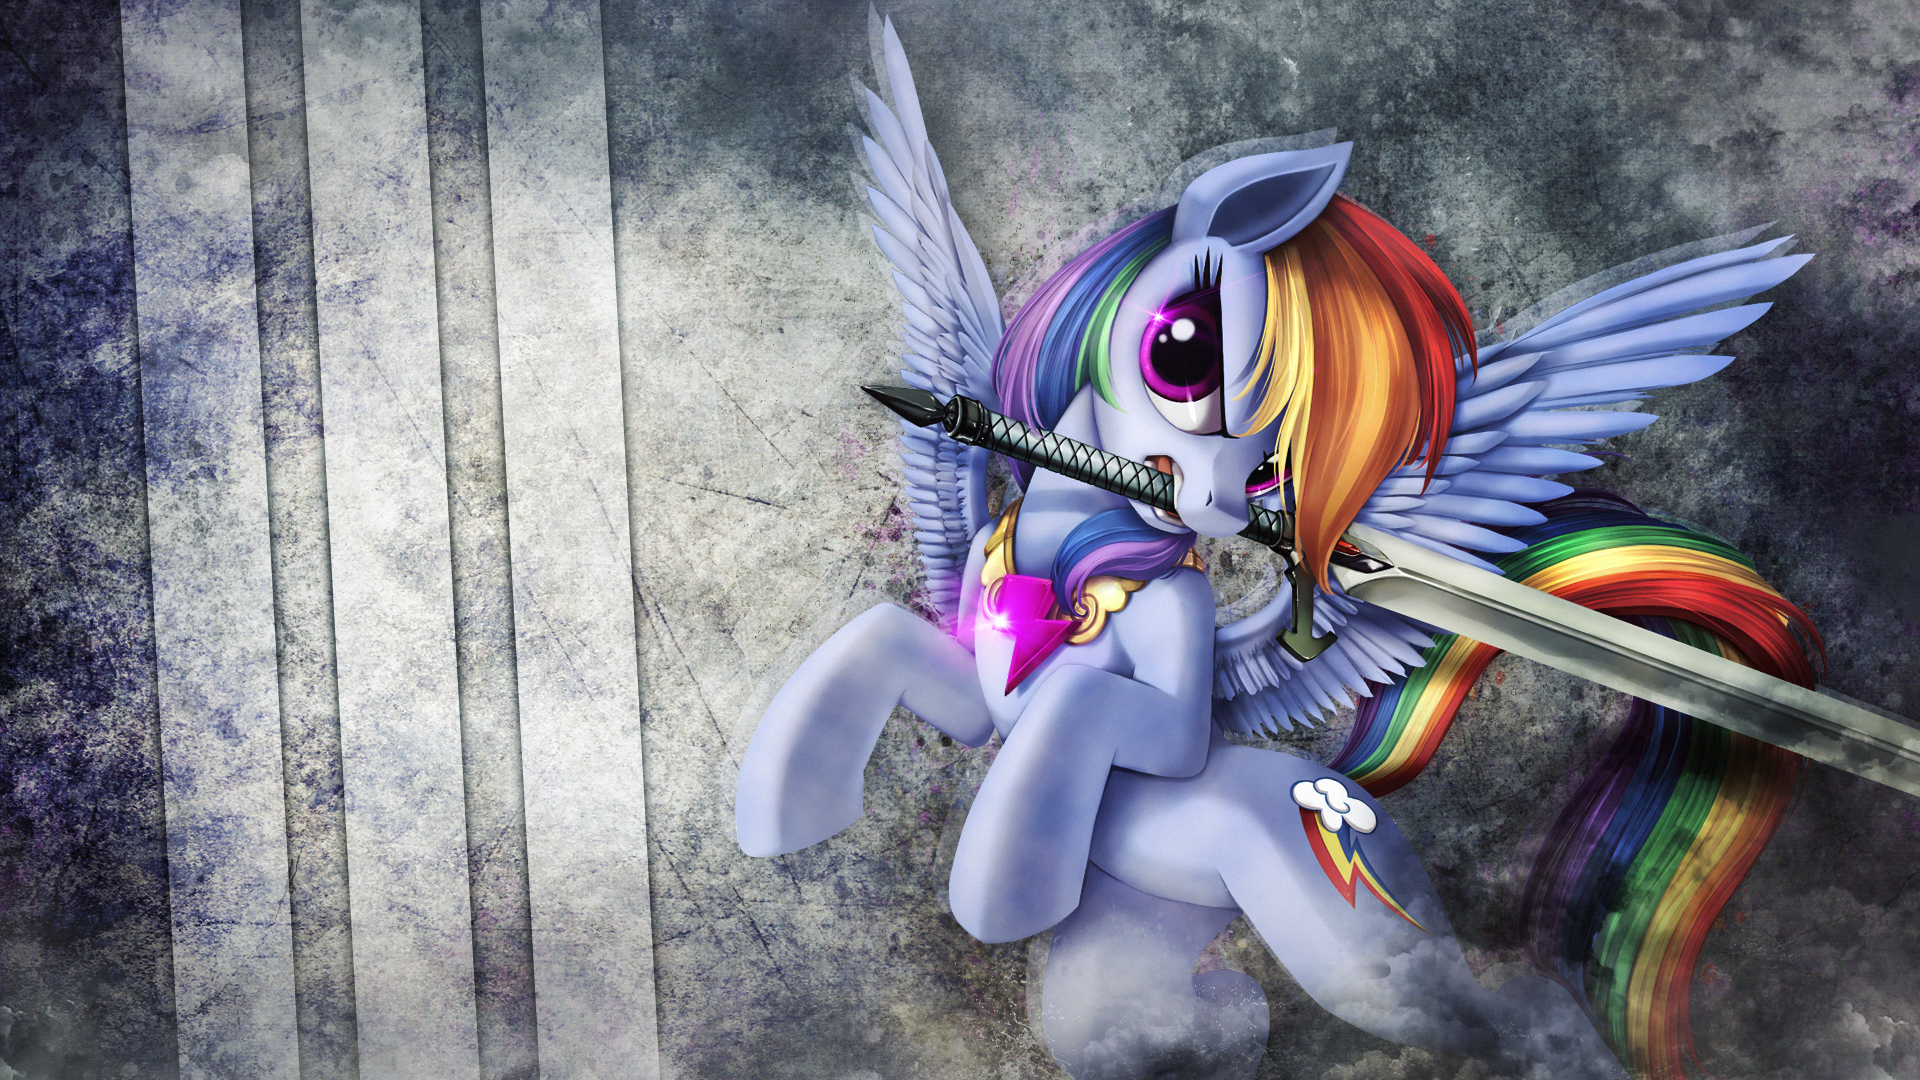 Wallpaper ~ Trashie. by Mackaged and ponyKillerX